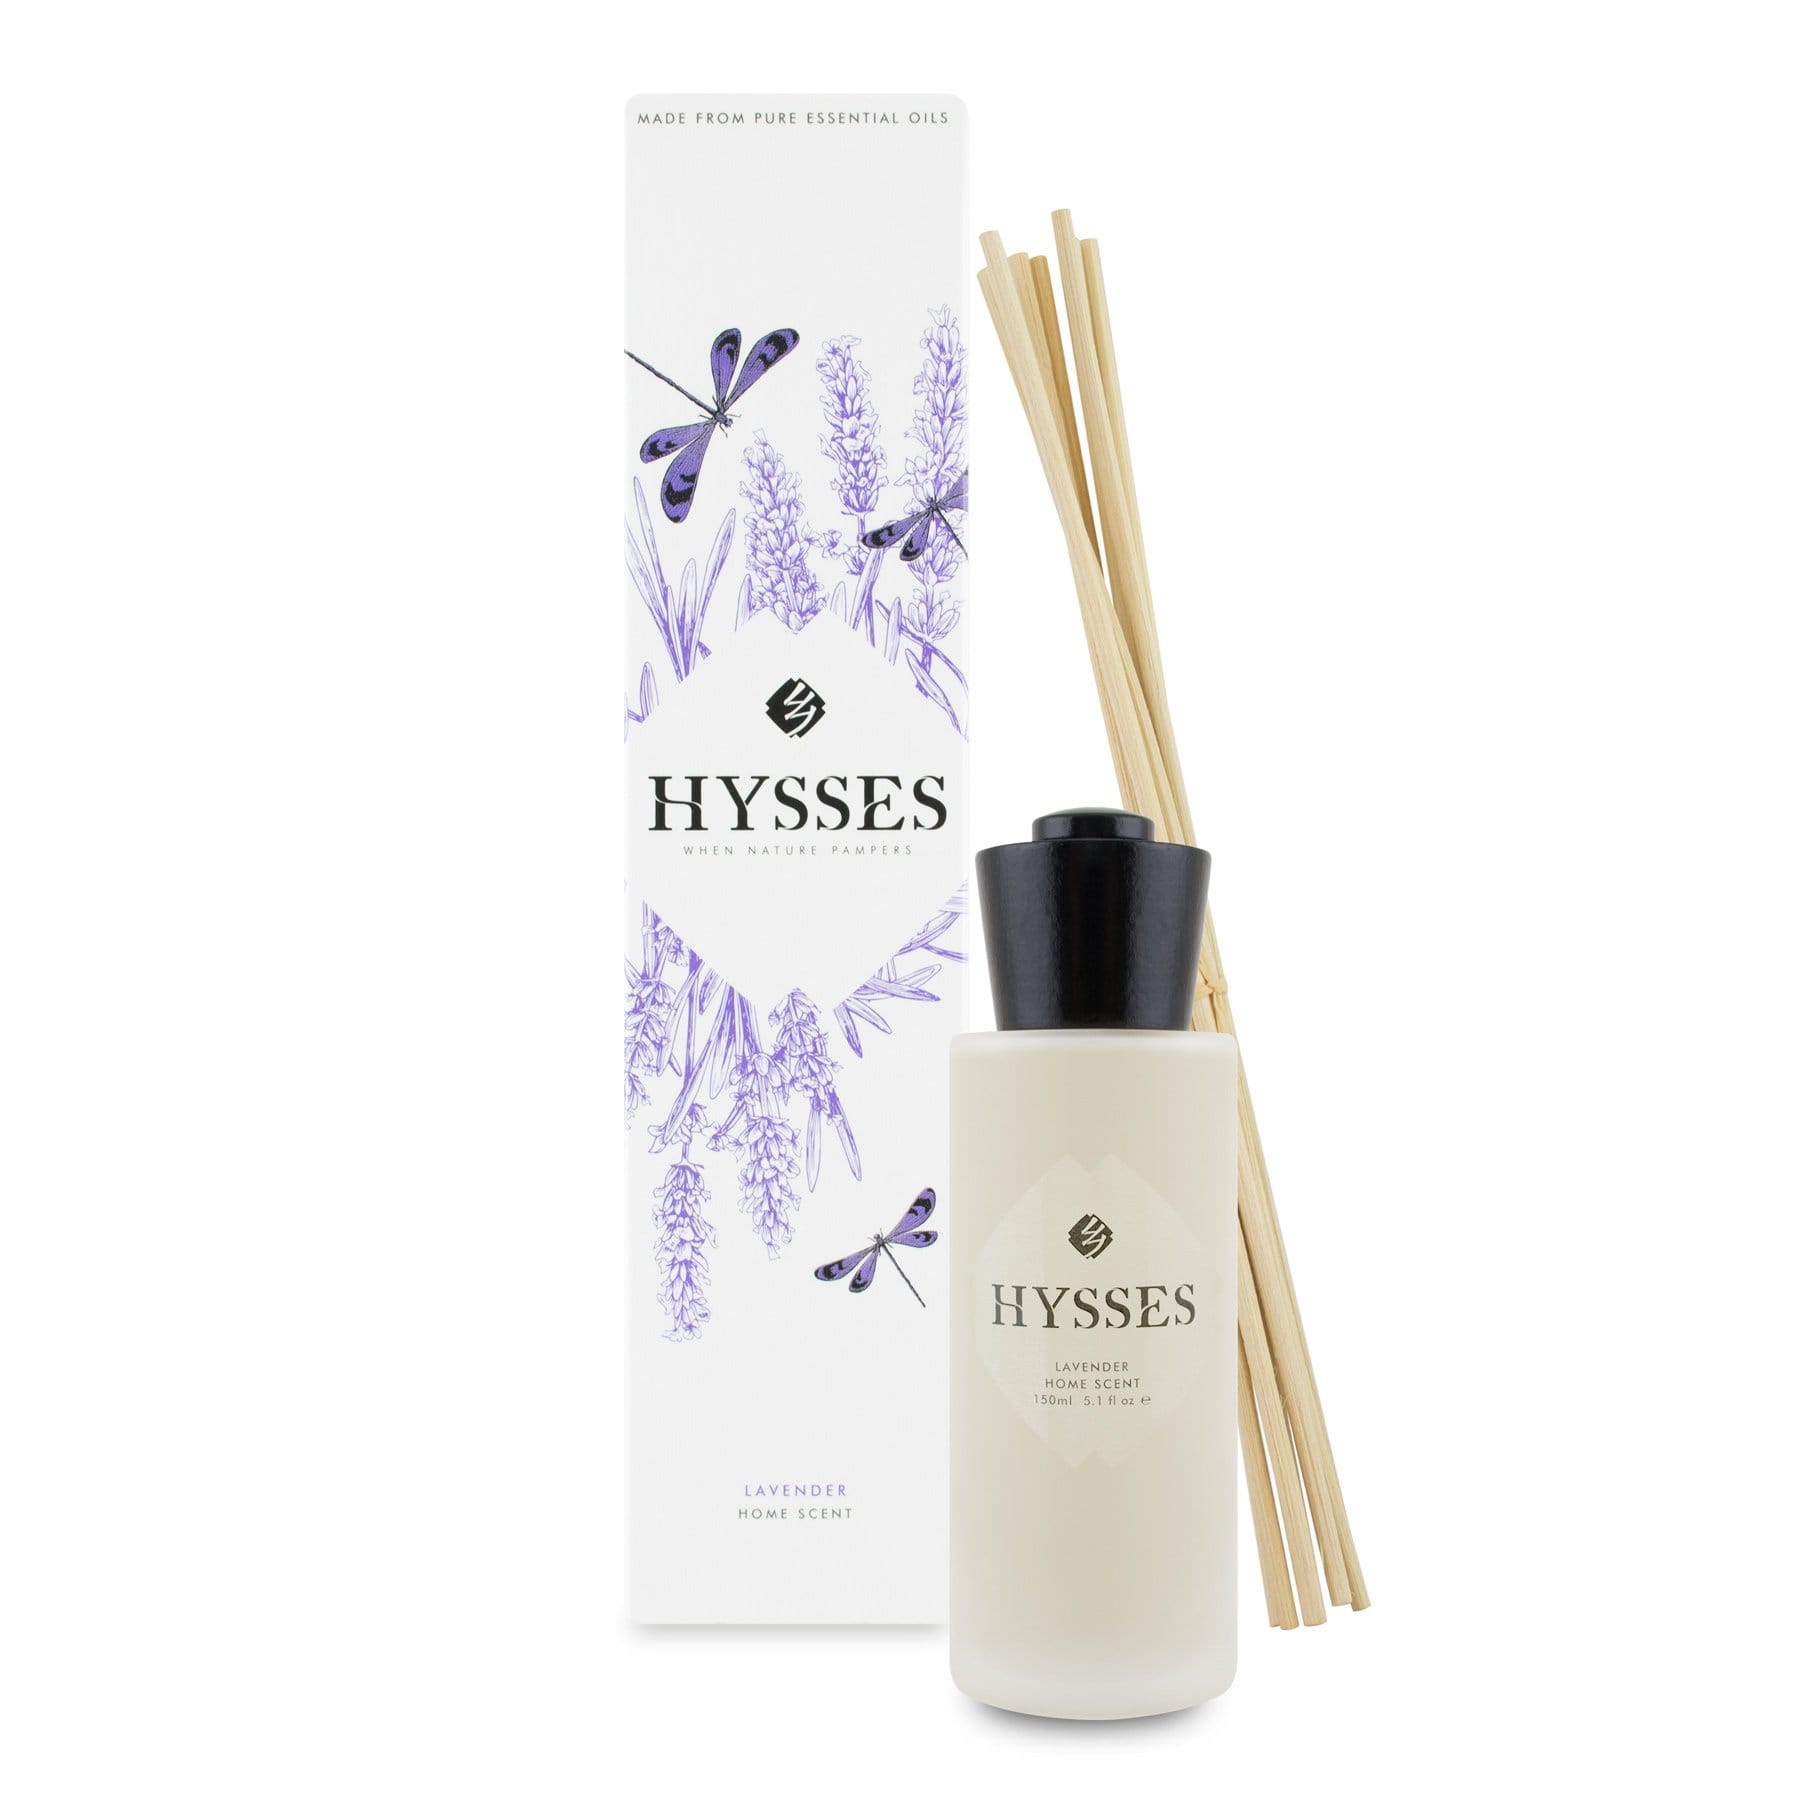 Hysses Home Scents 60ml Home Scent Reed Diffuser Lavender